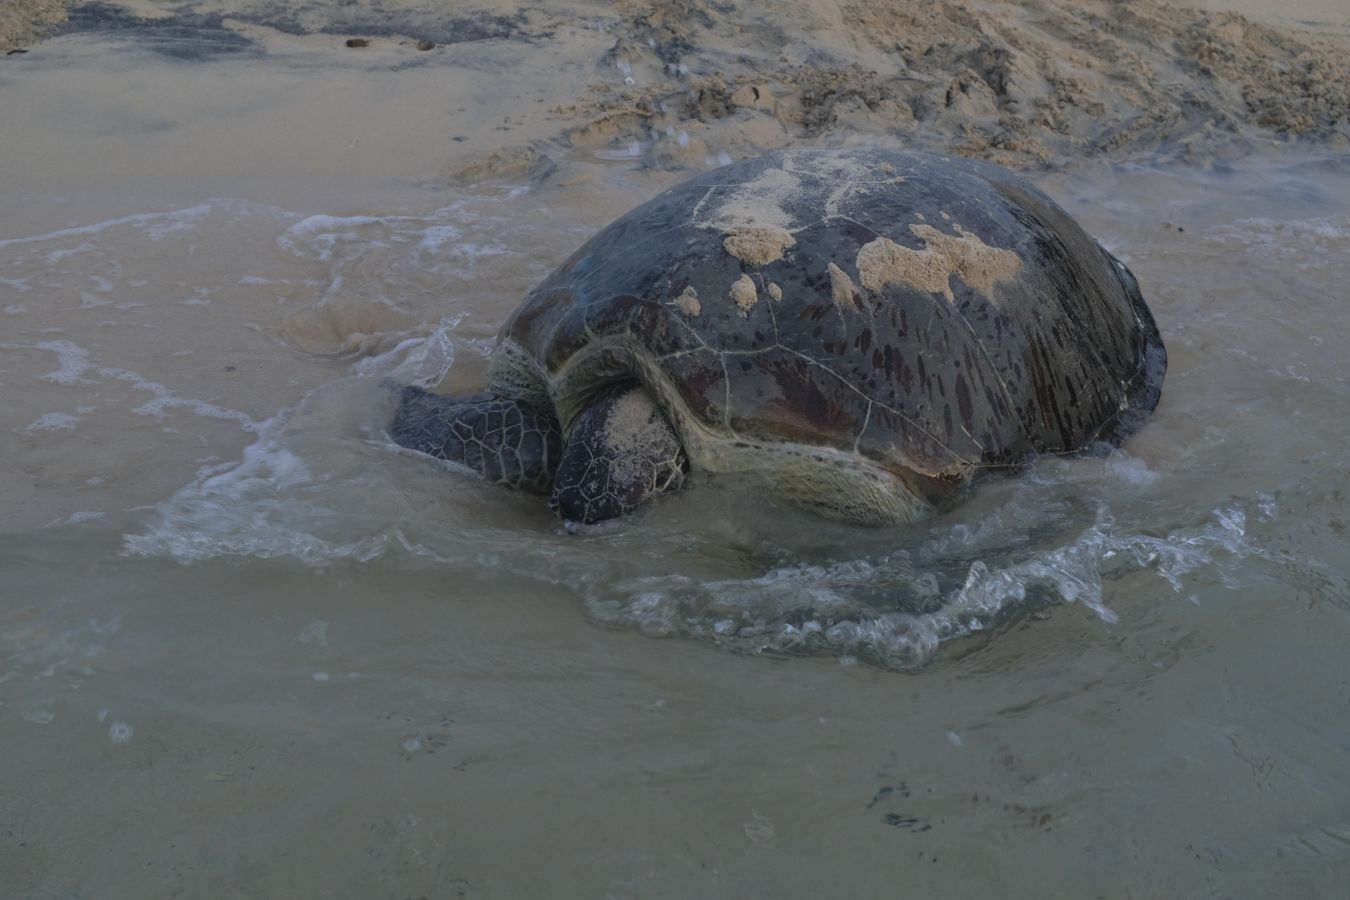 Green turtle entering the ocean after spawning.